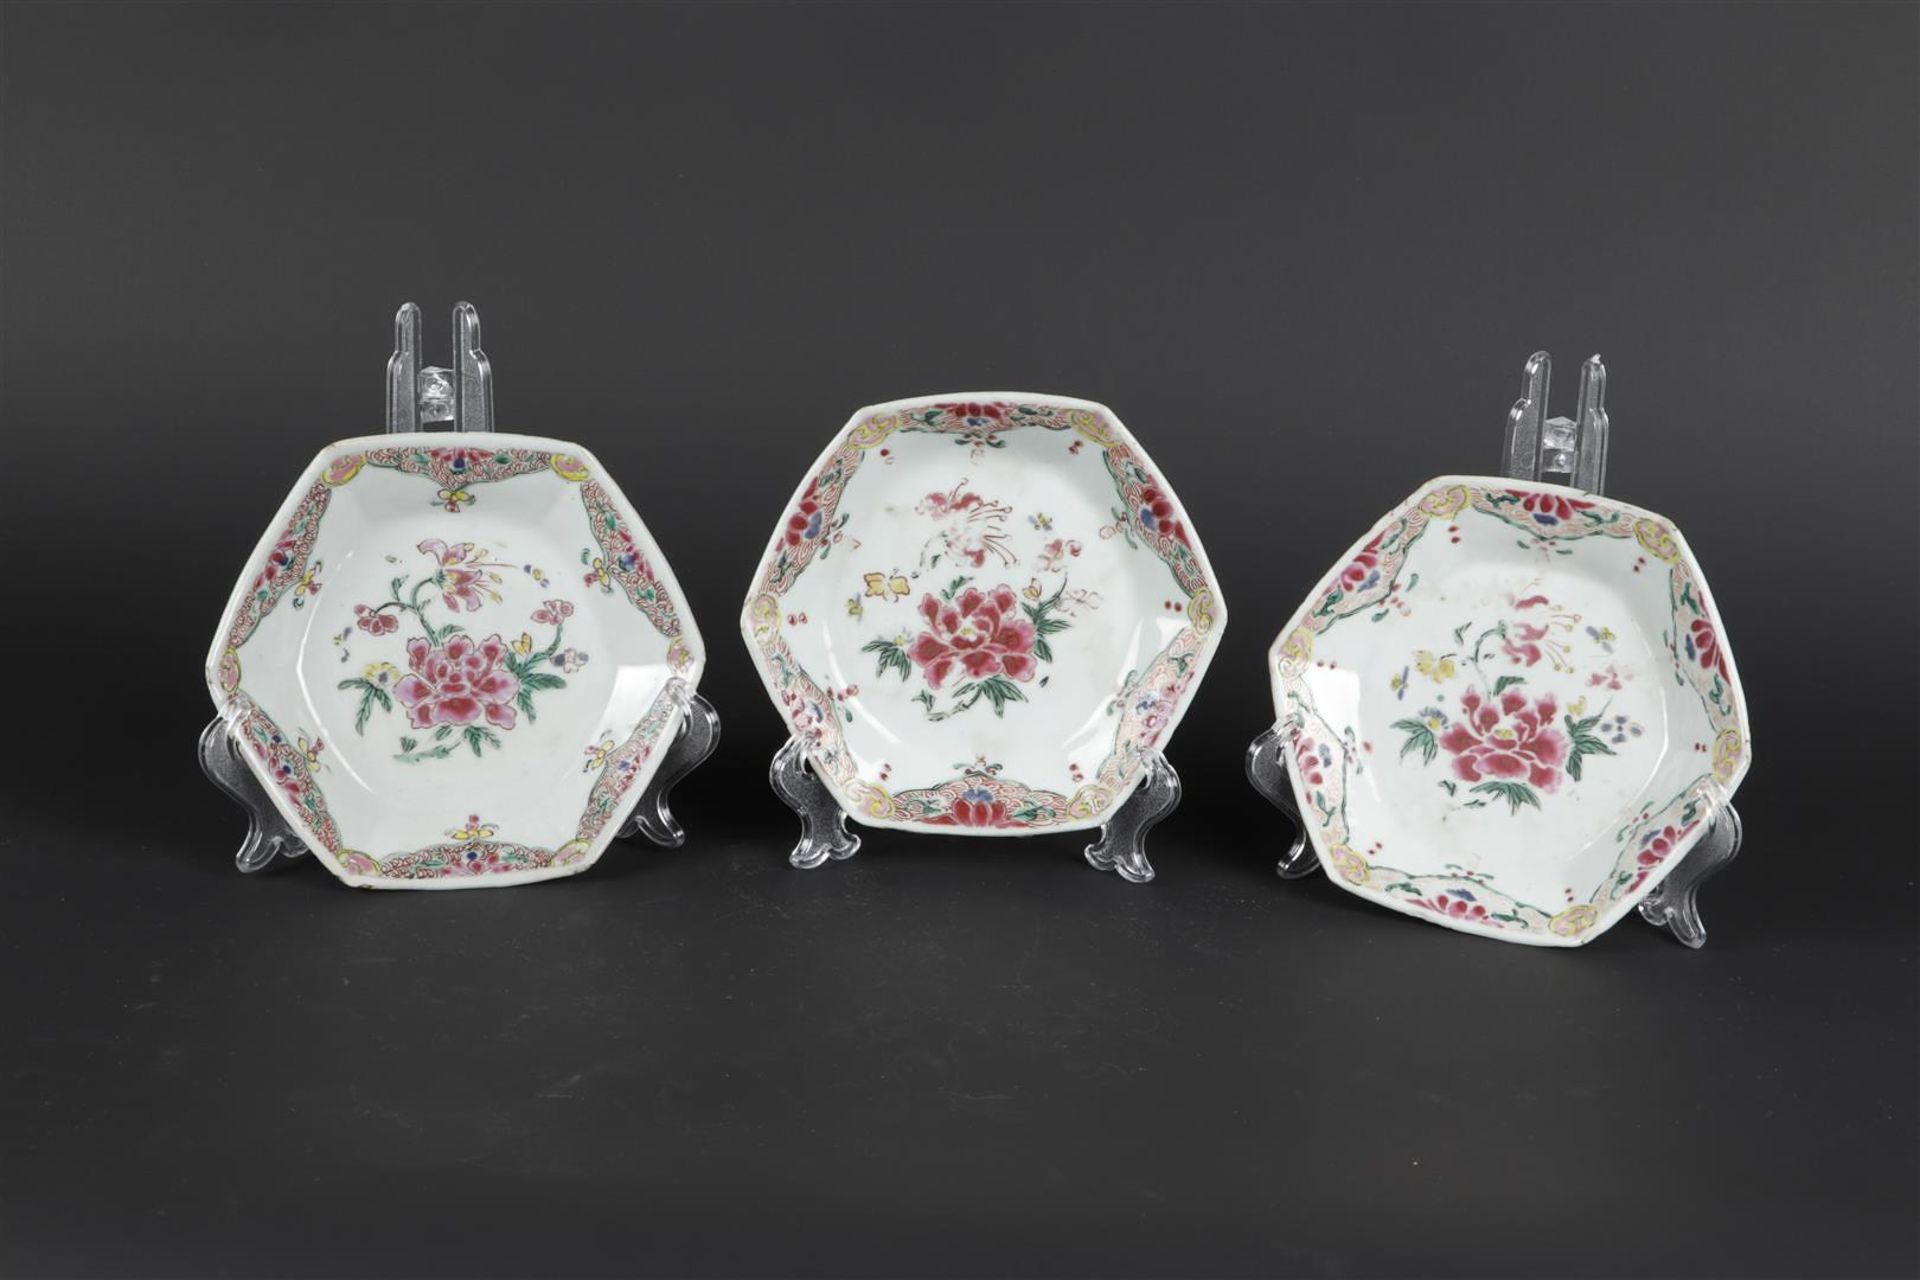 Three porcelain angled Famille Rose plates with rich floral decoration. China, Yongzheng/Qianlong.